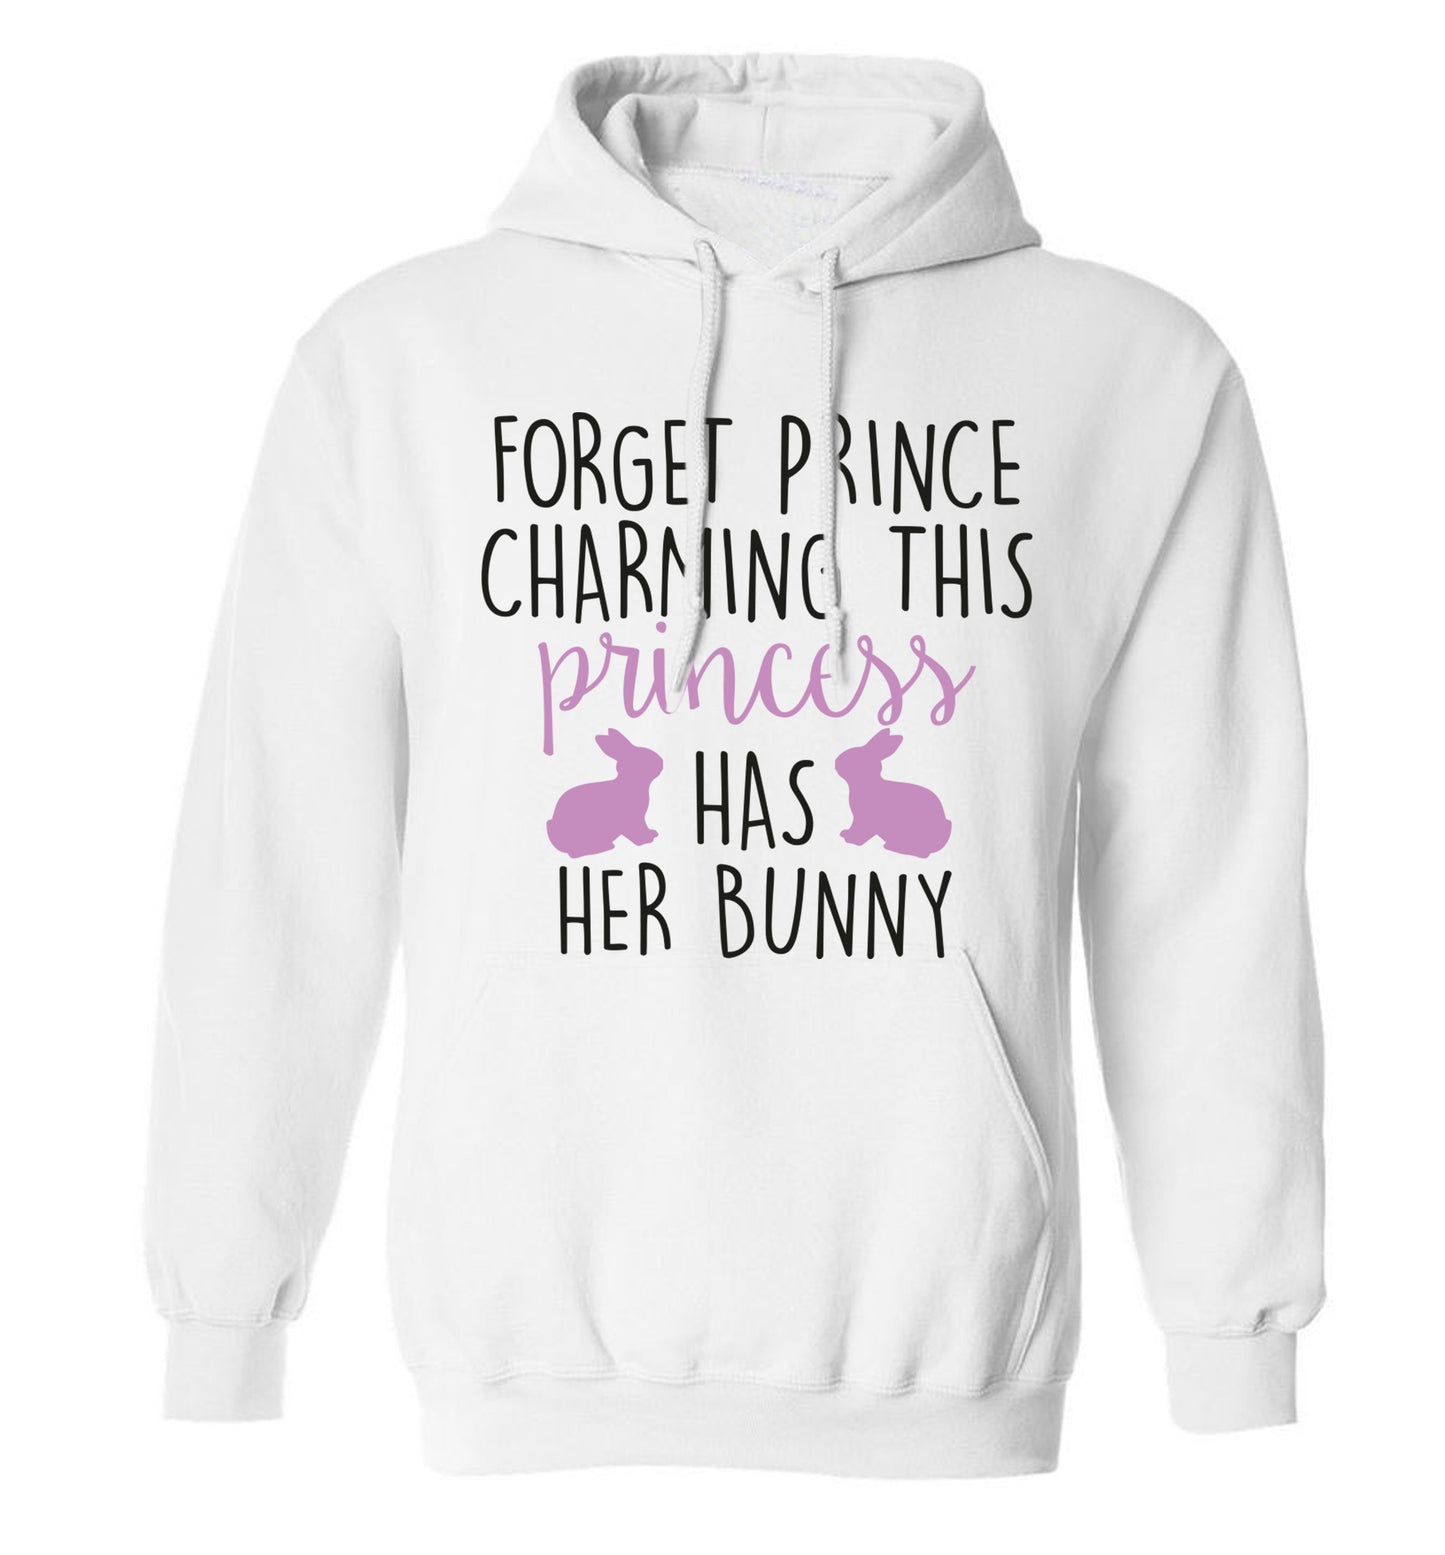 Forget prince charming this princess has her bunny adults unisex white hoodie 2XL